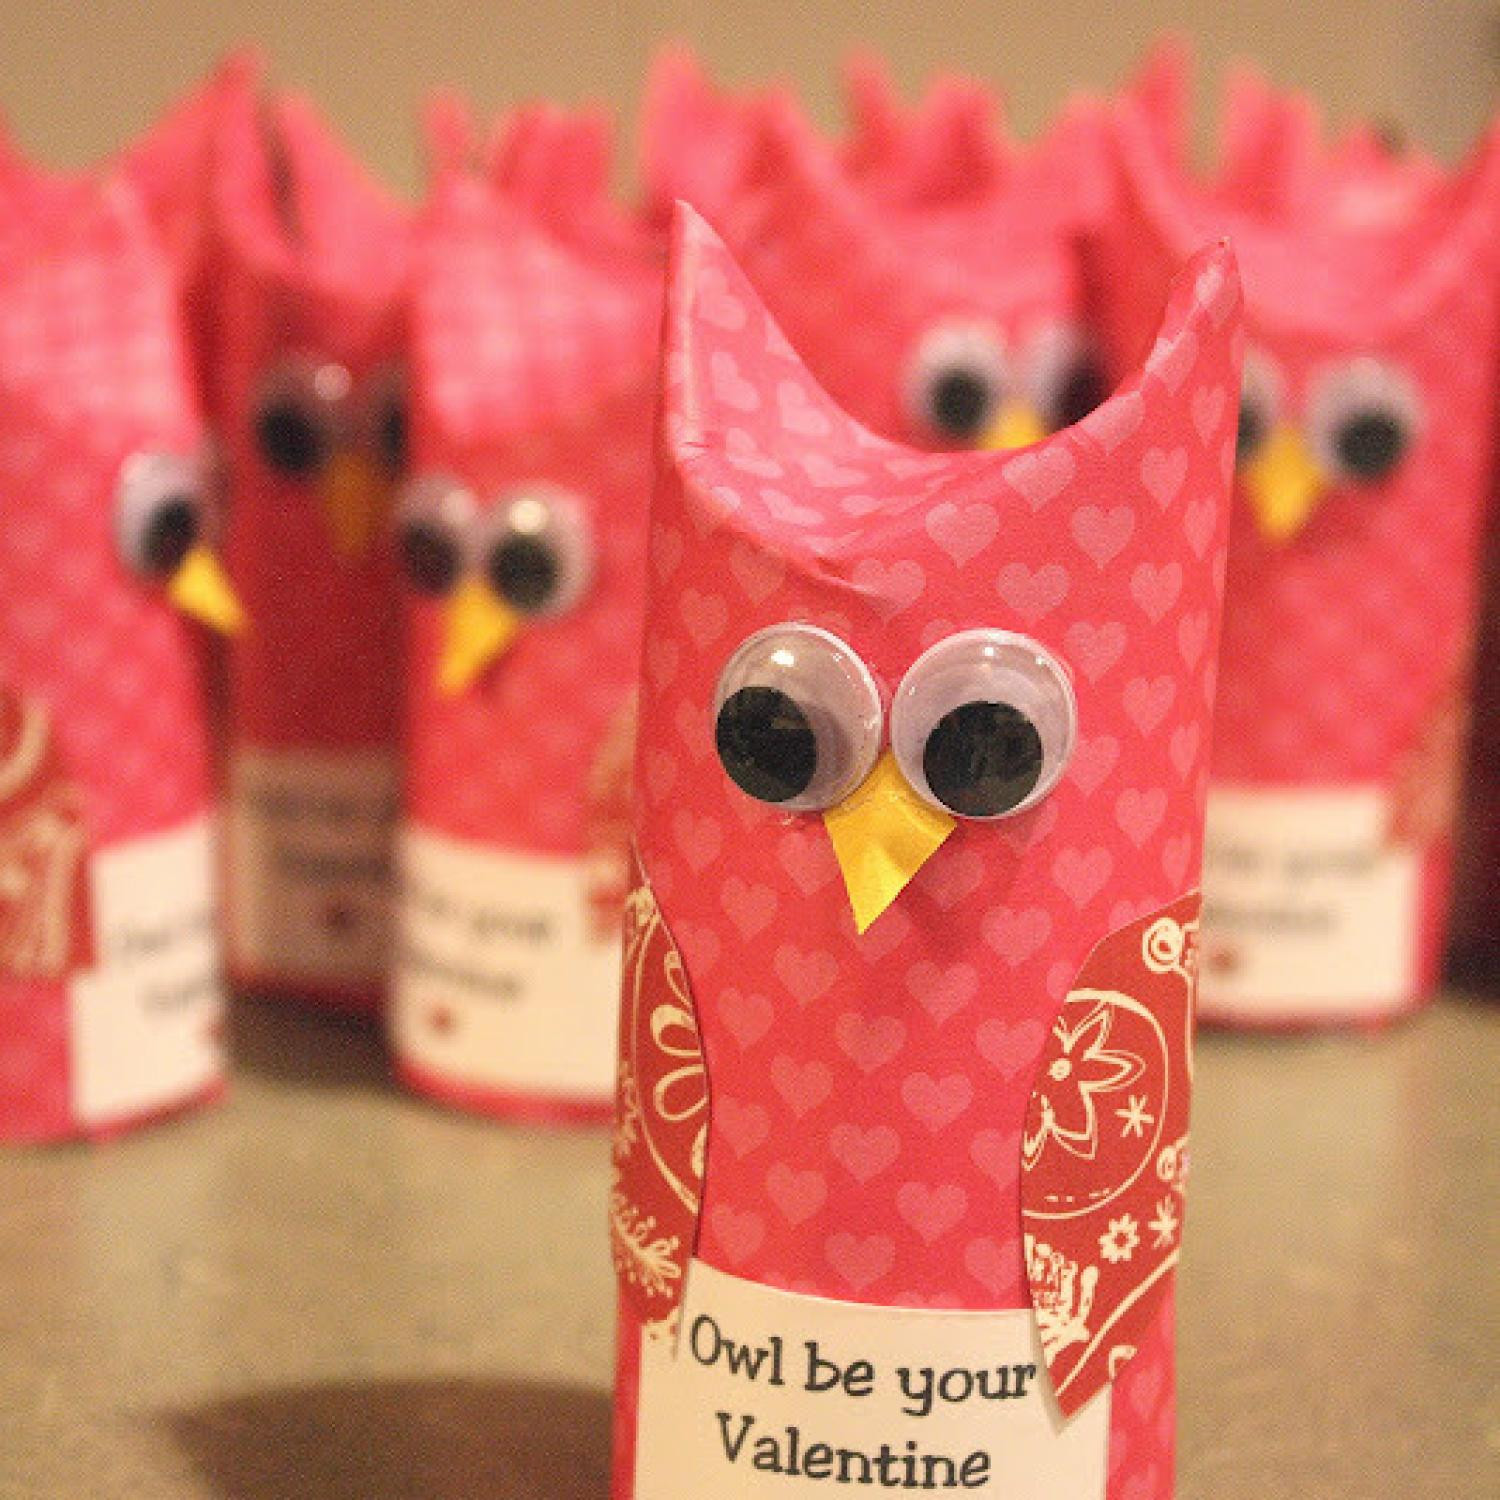 Valentines Homemade Gift Ideas
 Our Favorite Homemade Valentines for Kids